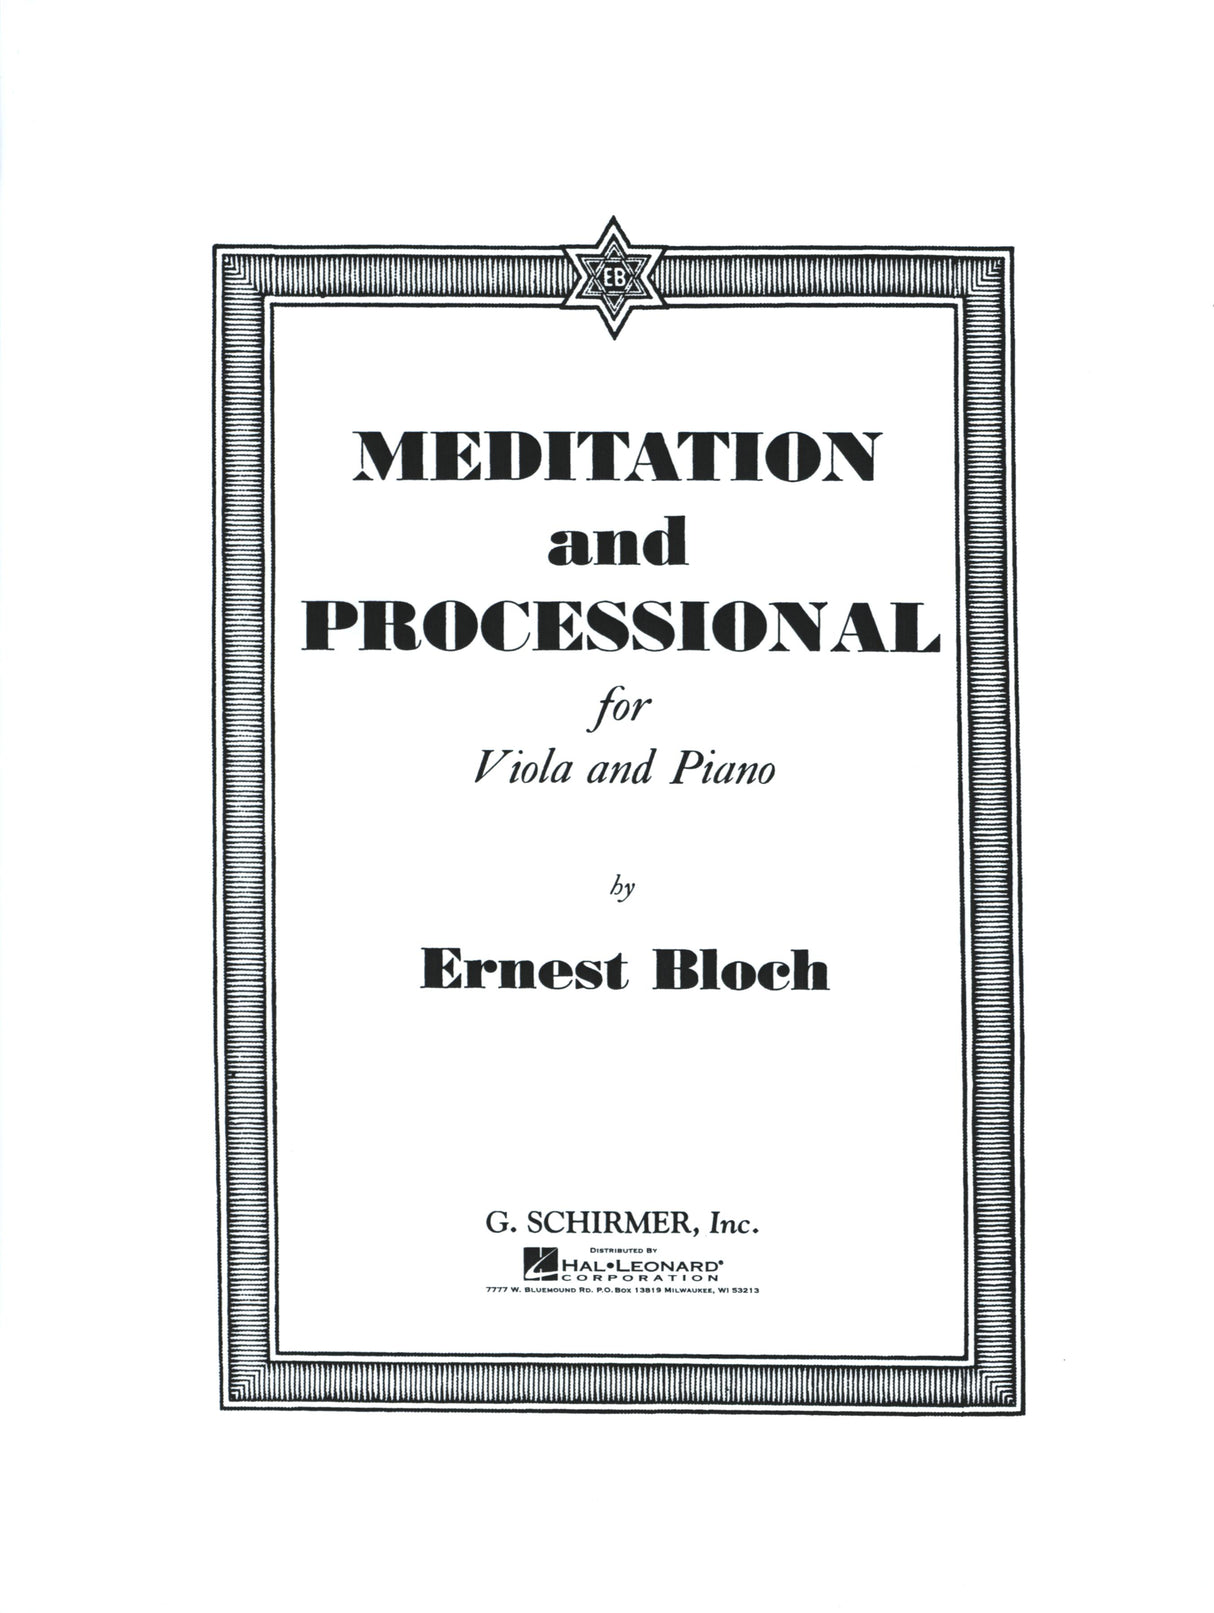 Bloch: Meditation and Processional